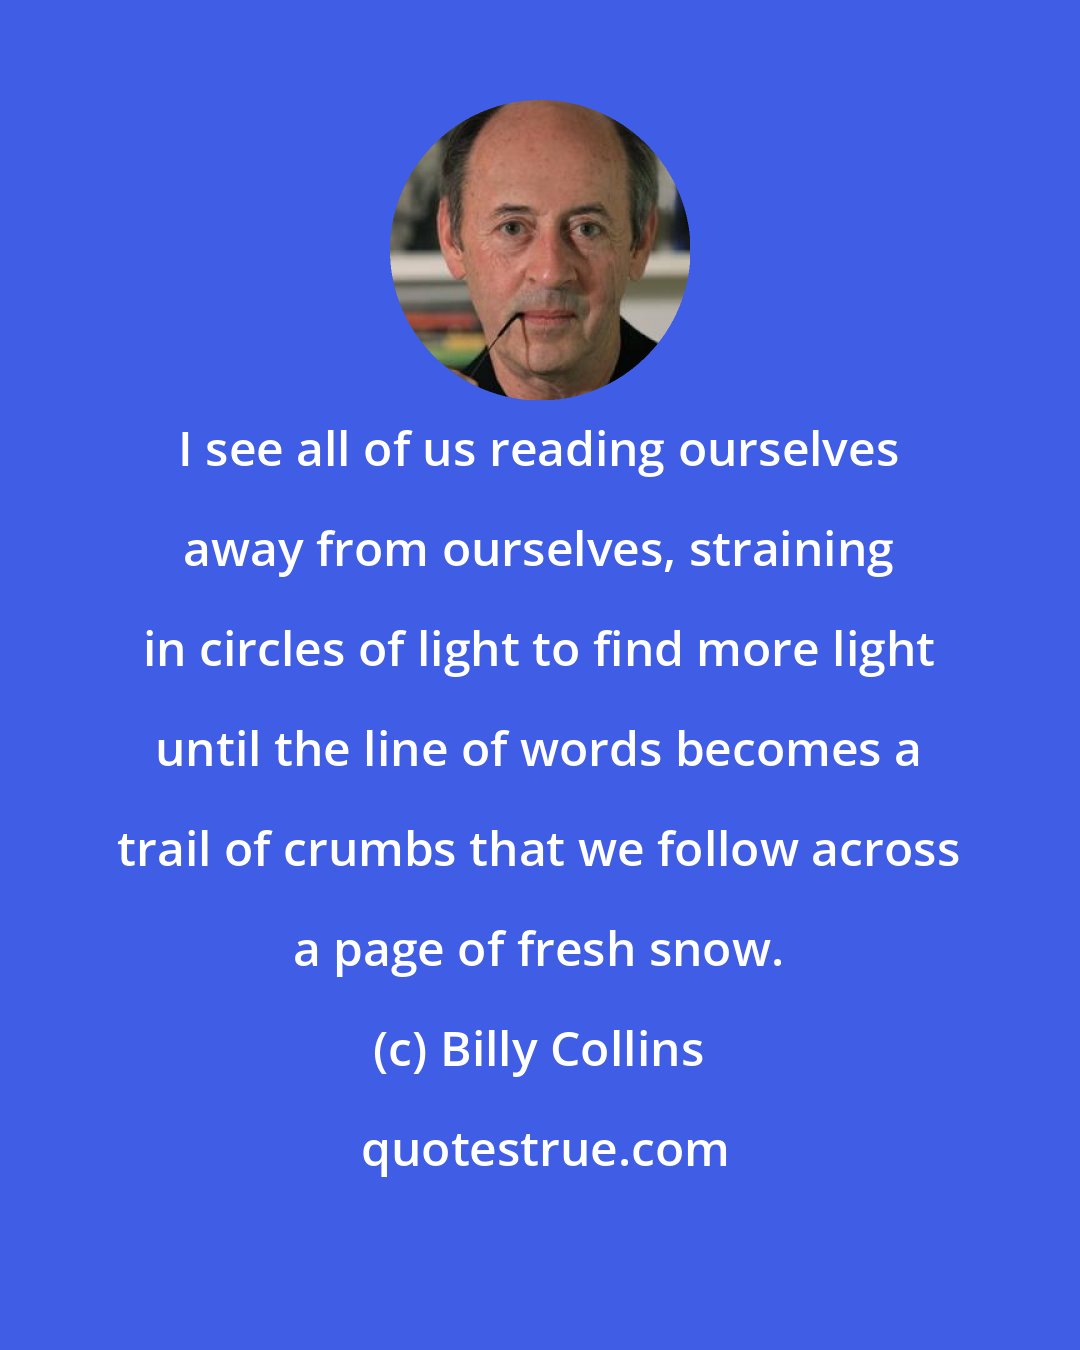 Billy Collins: I see all of us reading ourselves away from ourselves, straining in circles of light to find more light until the line of words becomes a trail of crumbs that we follow across a page of fresh snow.